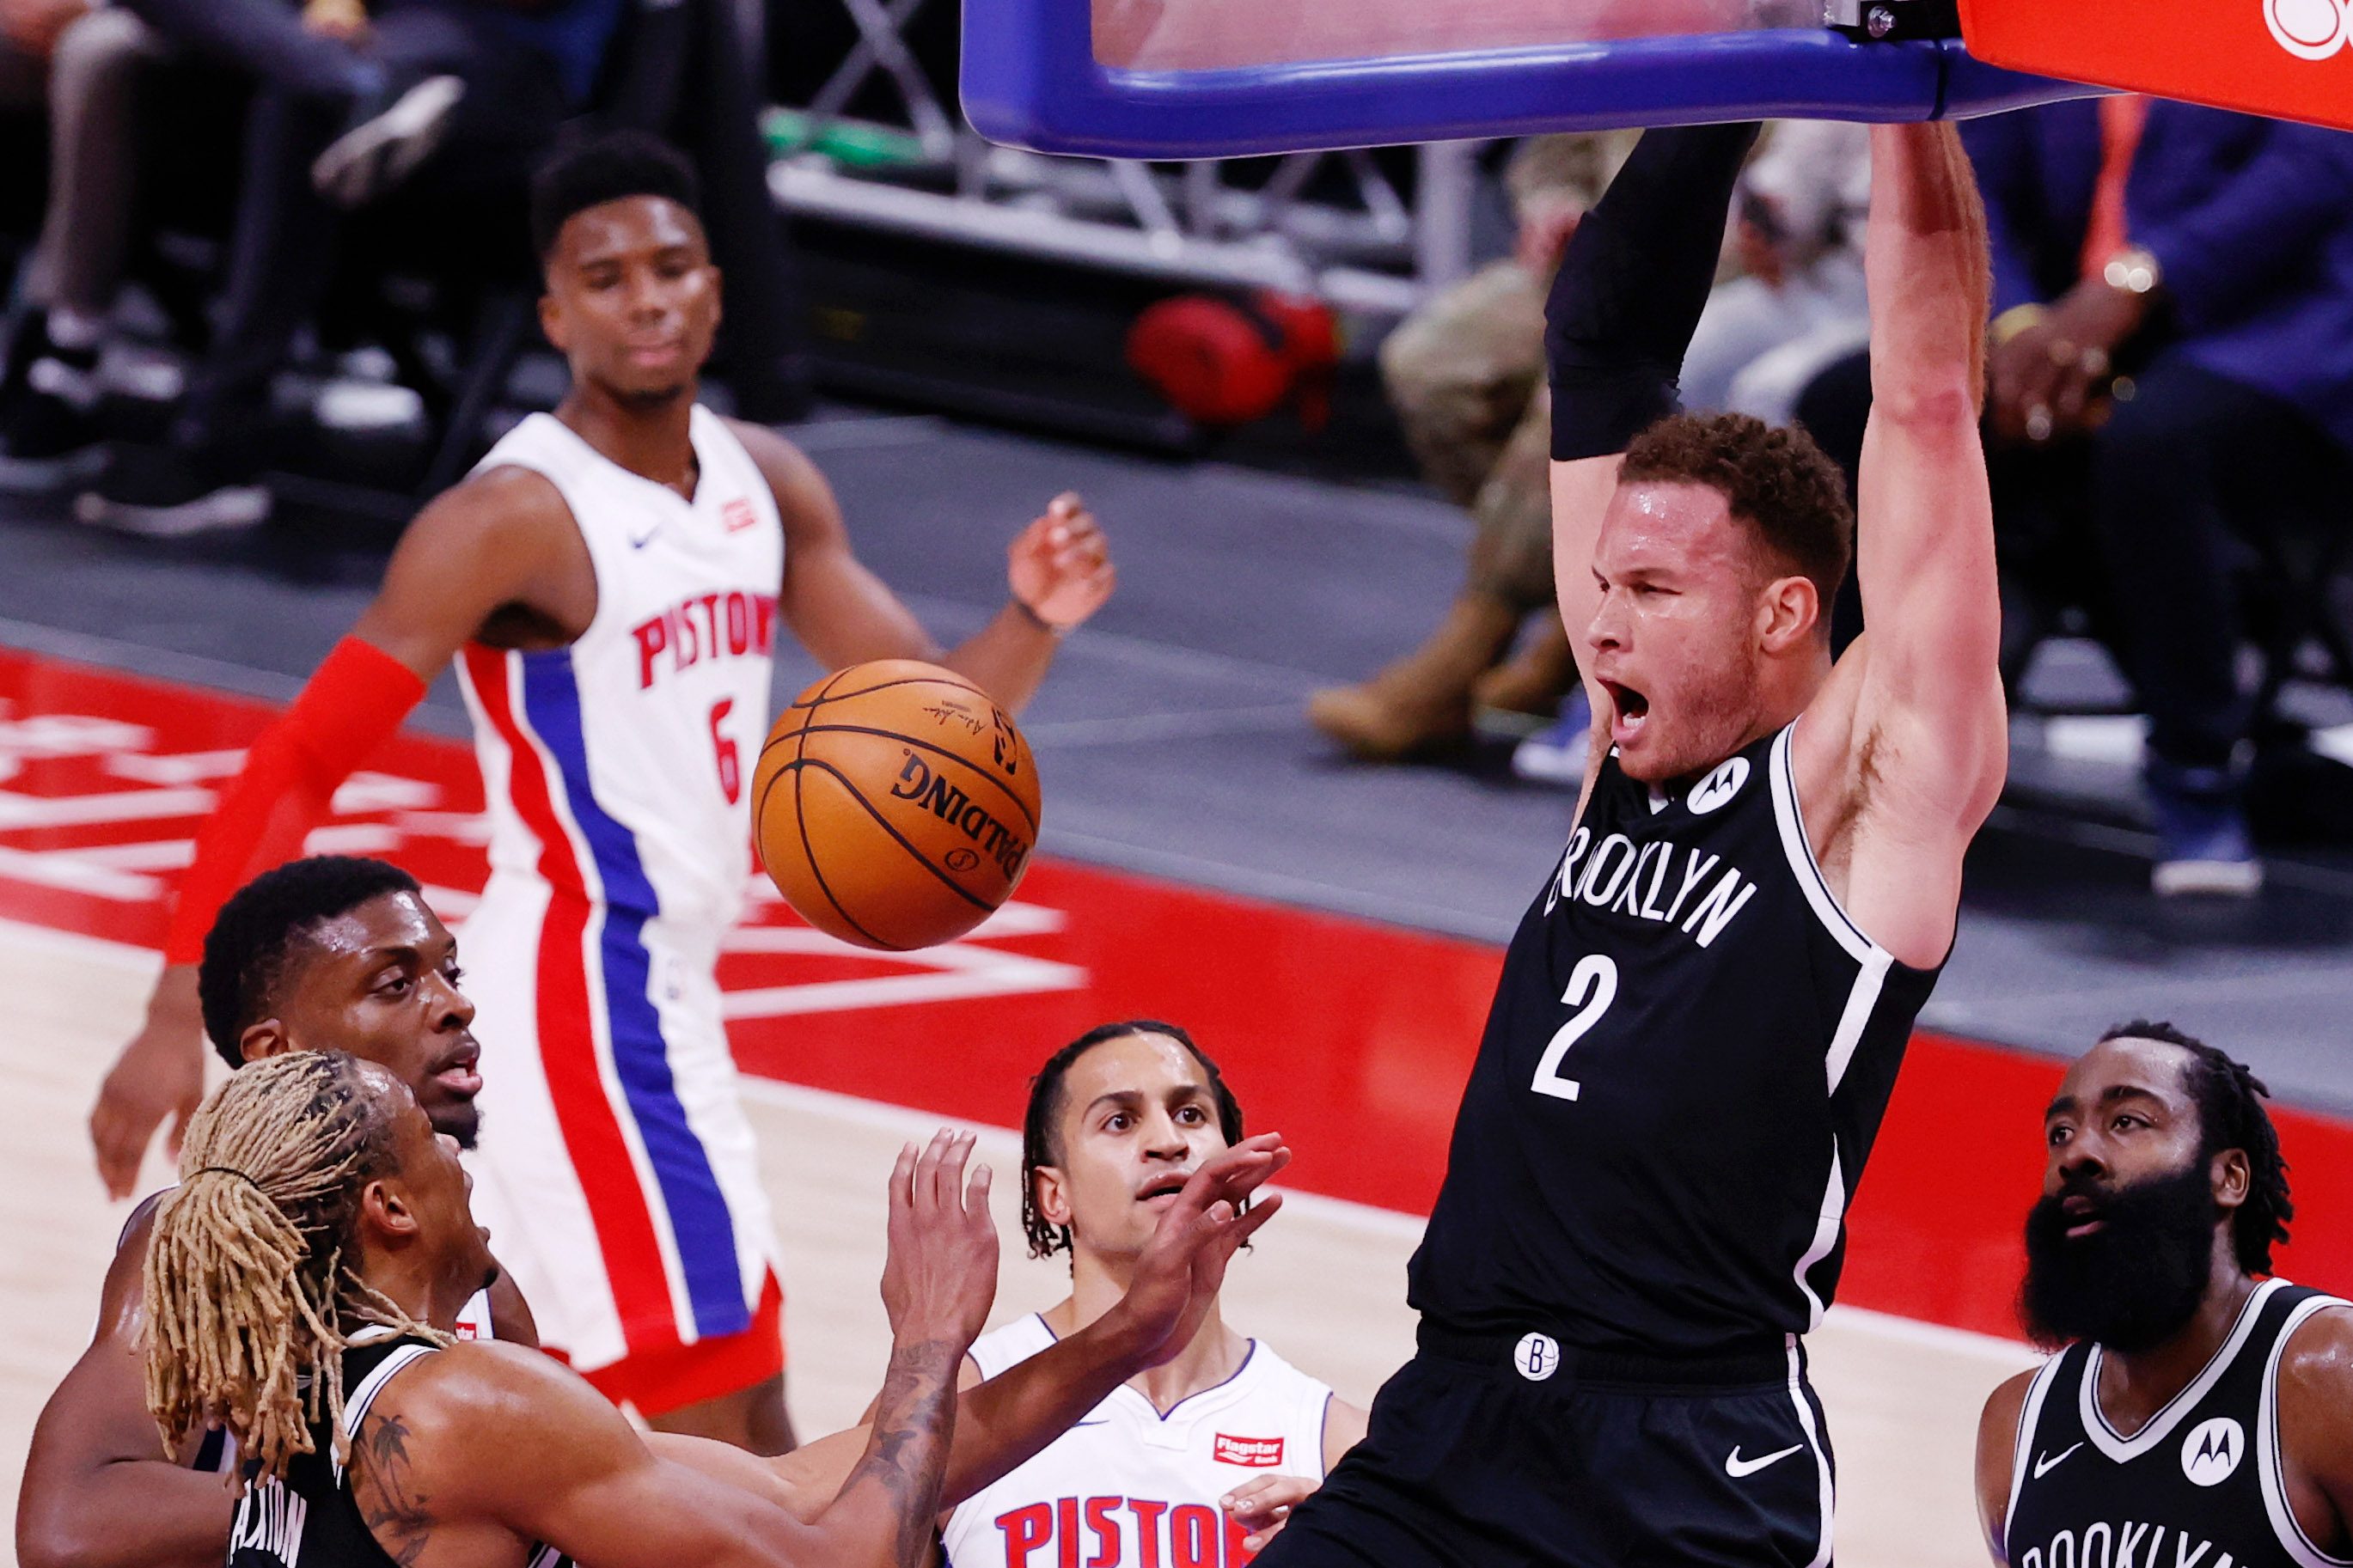 WATCH: Nets’ Blake Griffin throws down first alley-oop dunk in 4 years